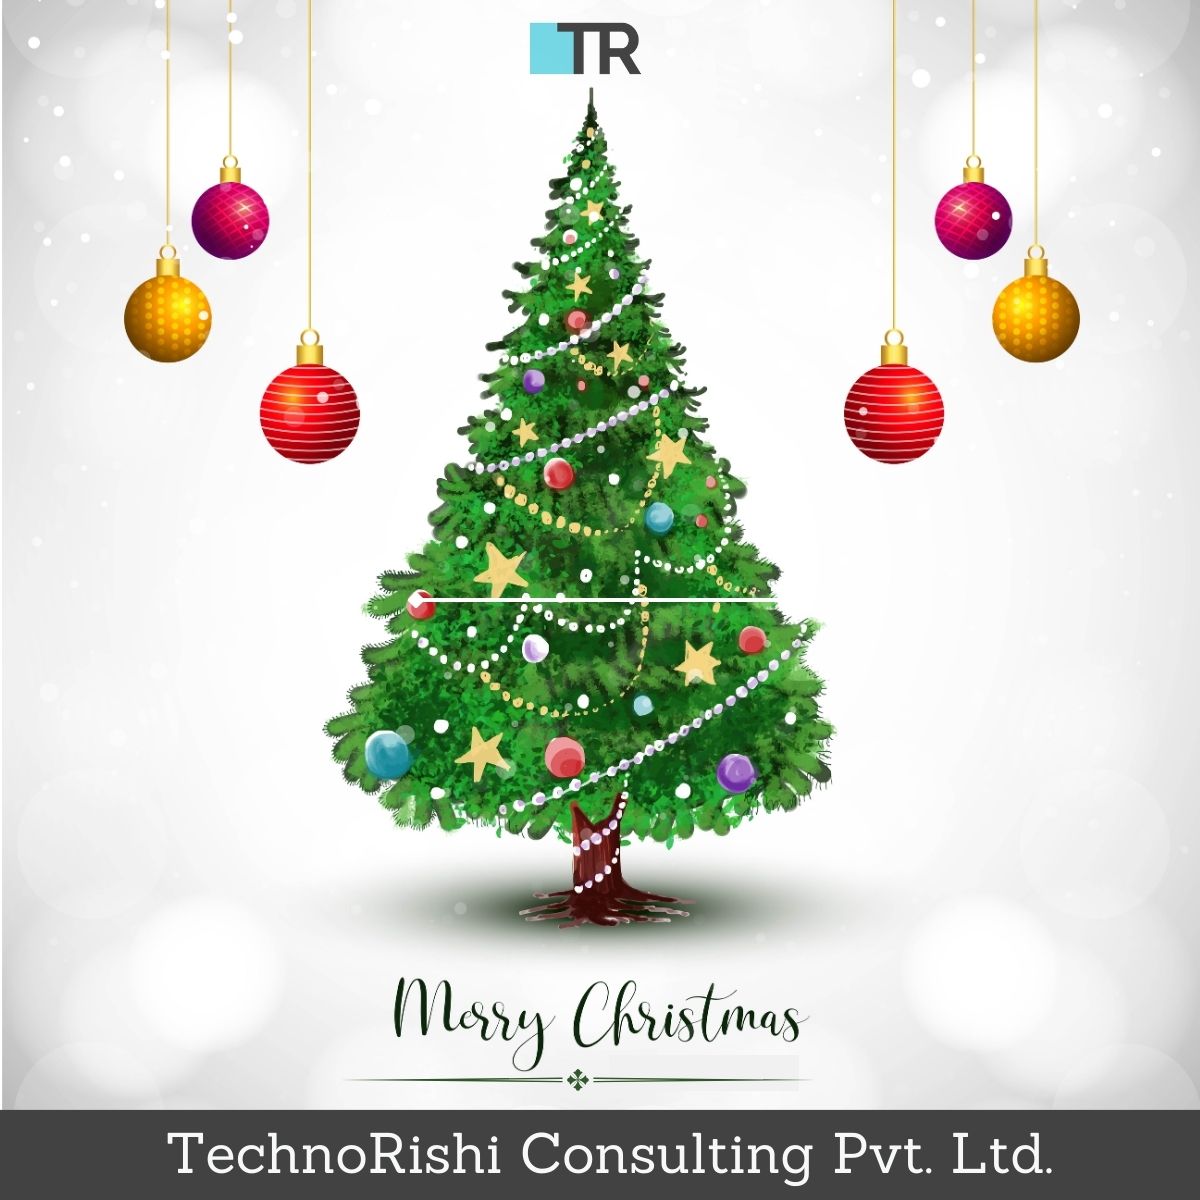 Wishing you joy, peace, and love this Christmas. 🧑‍🎄🎄❄️

May the festive season bring warmth and happiness to your heart. 💓🍰

#merrychristmas #jesuslovesyou #christmas2023 #christmasparty #santaclaus #technorishiconsulting #technorishi